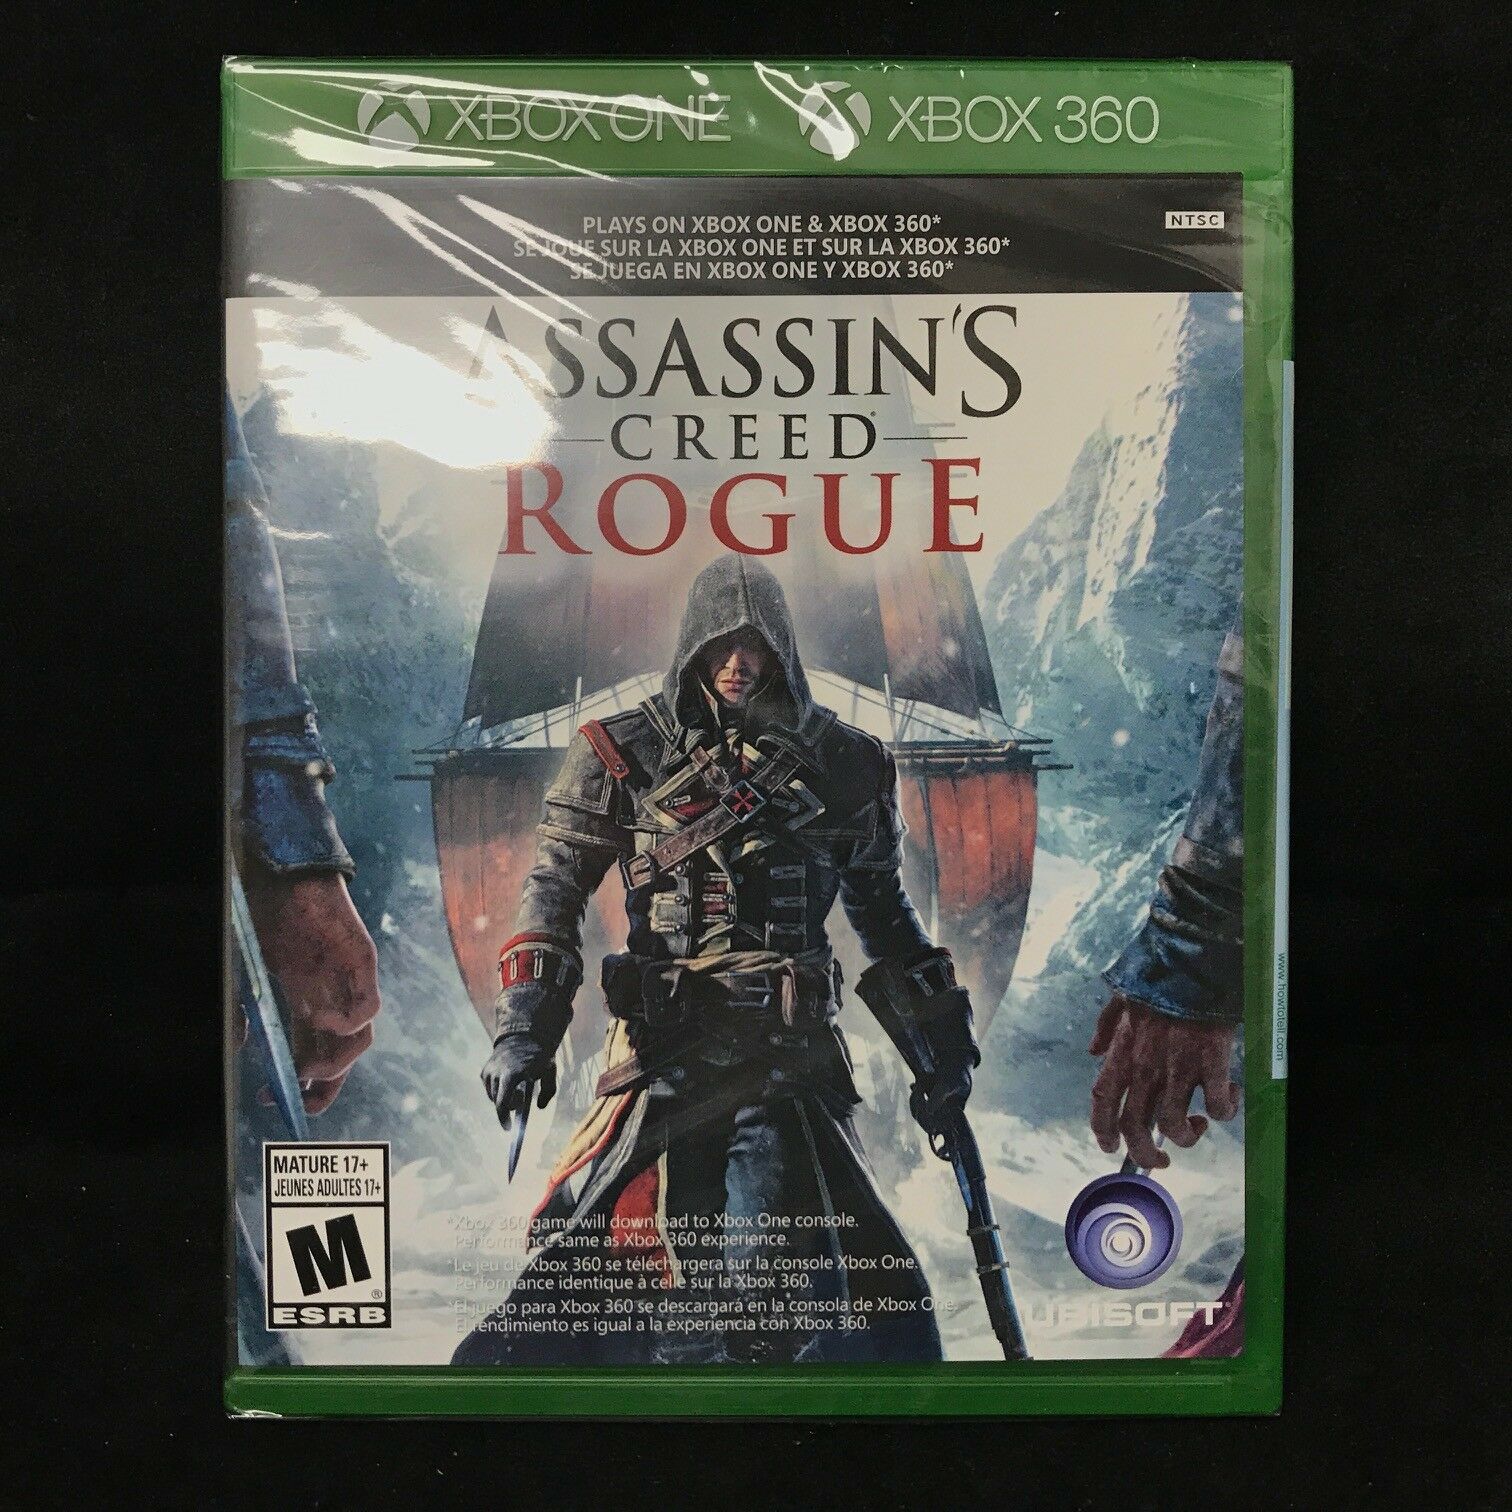 Assassin s Creed: Rogue: Remastered xbox one